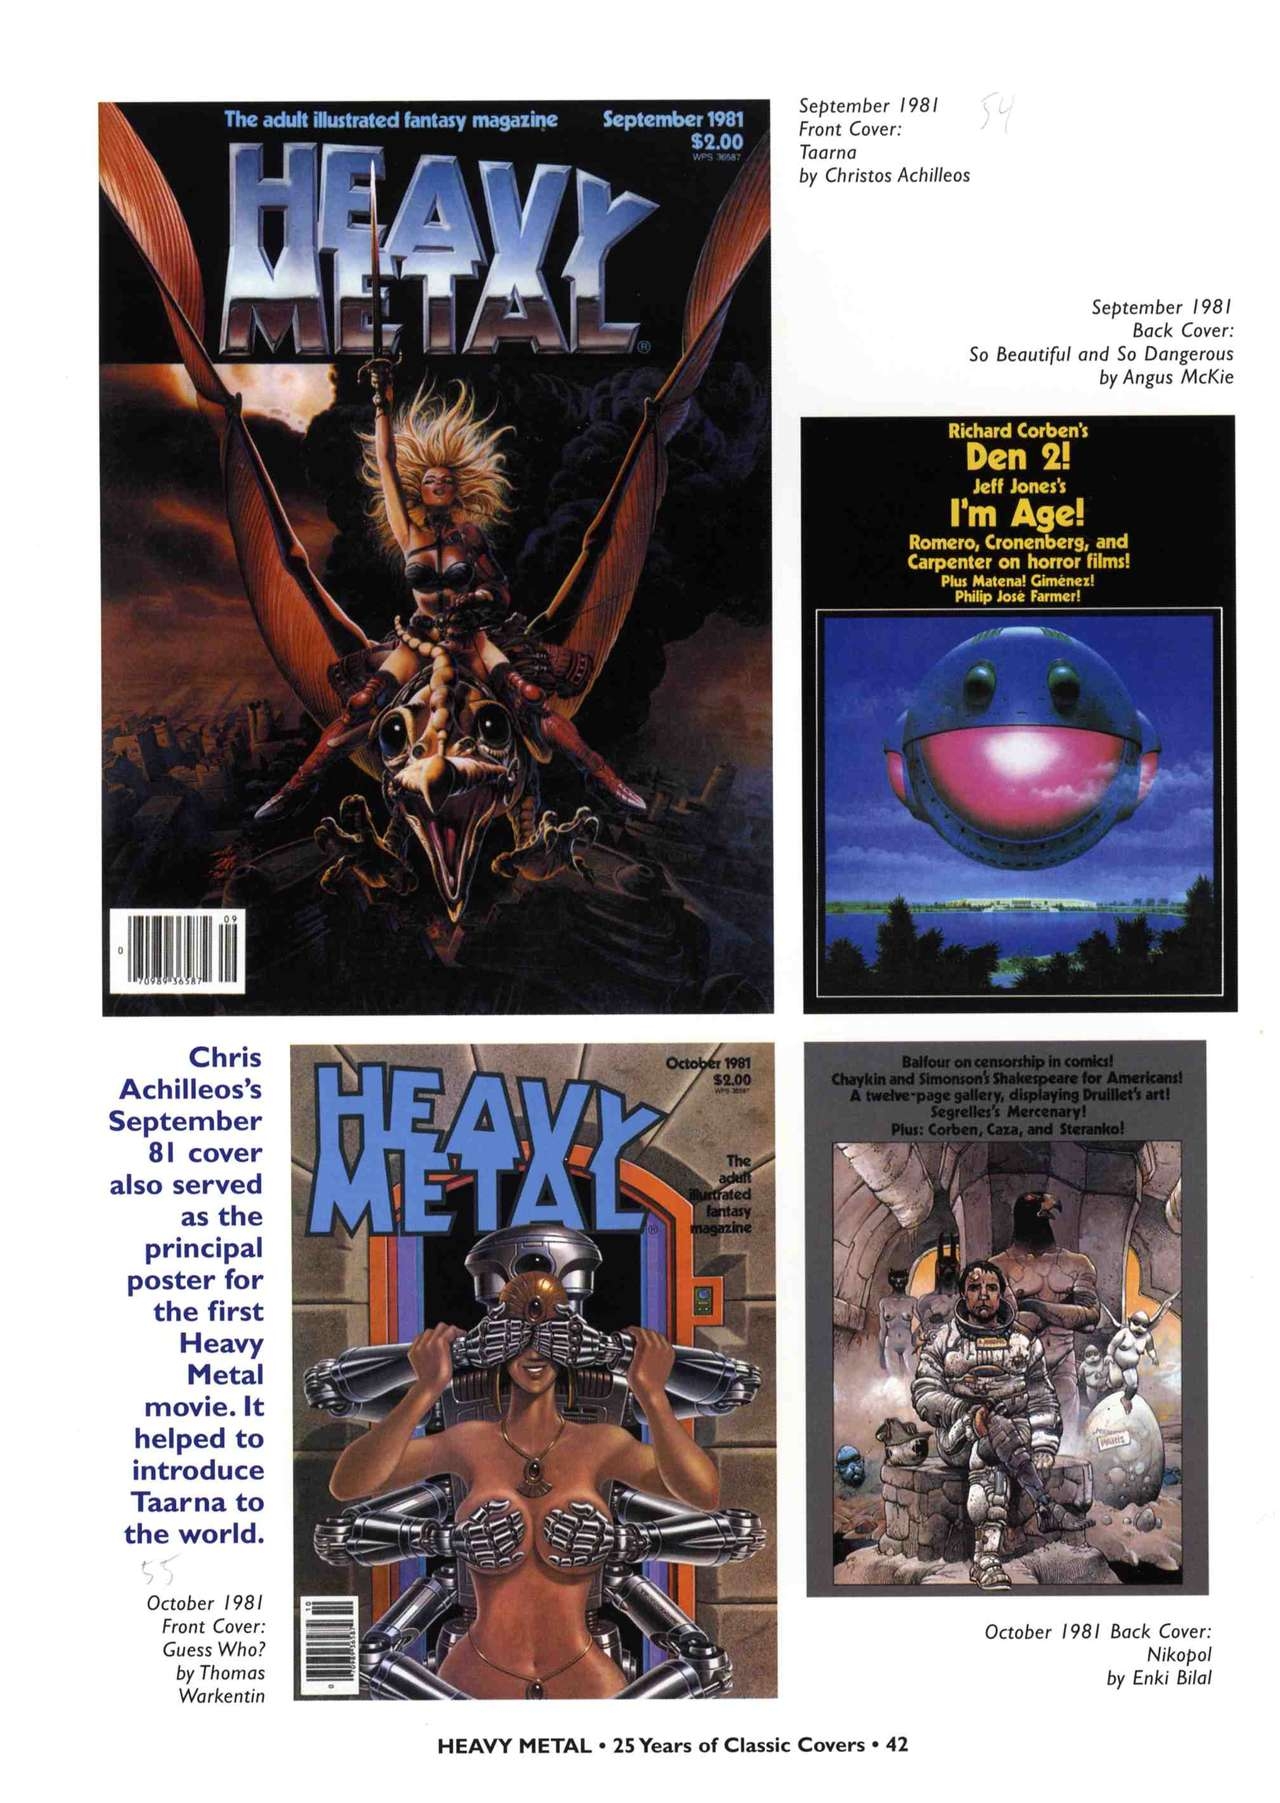 HEAVY METAL 25 Years of Classic Covers 47